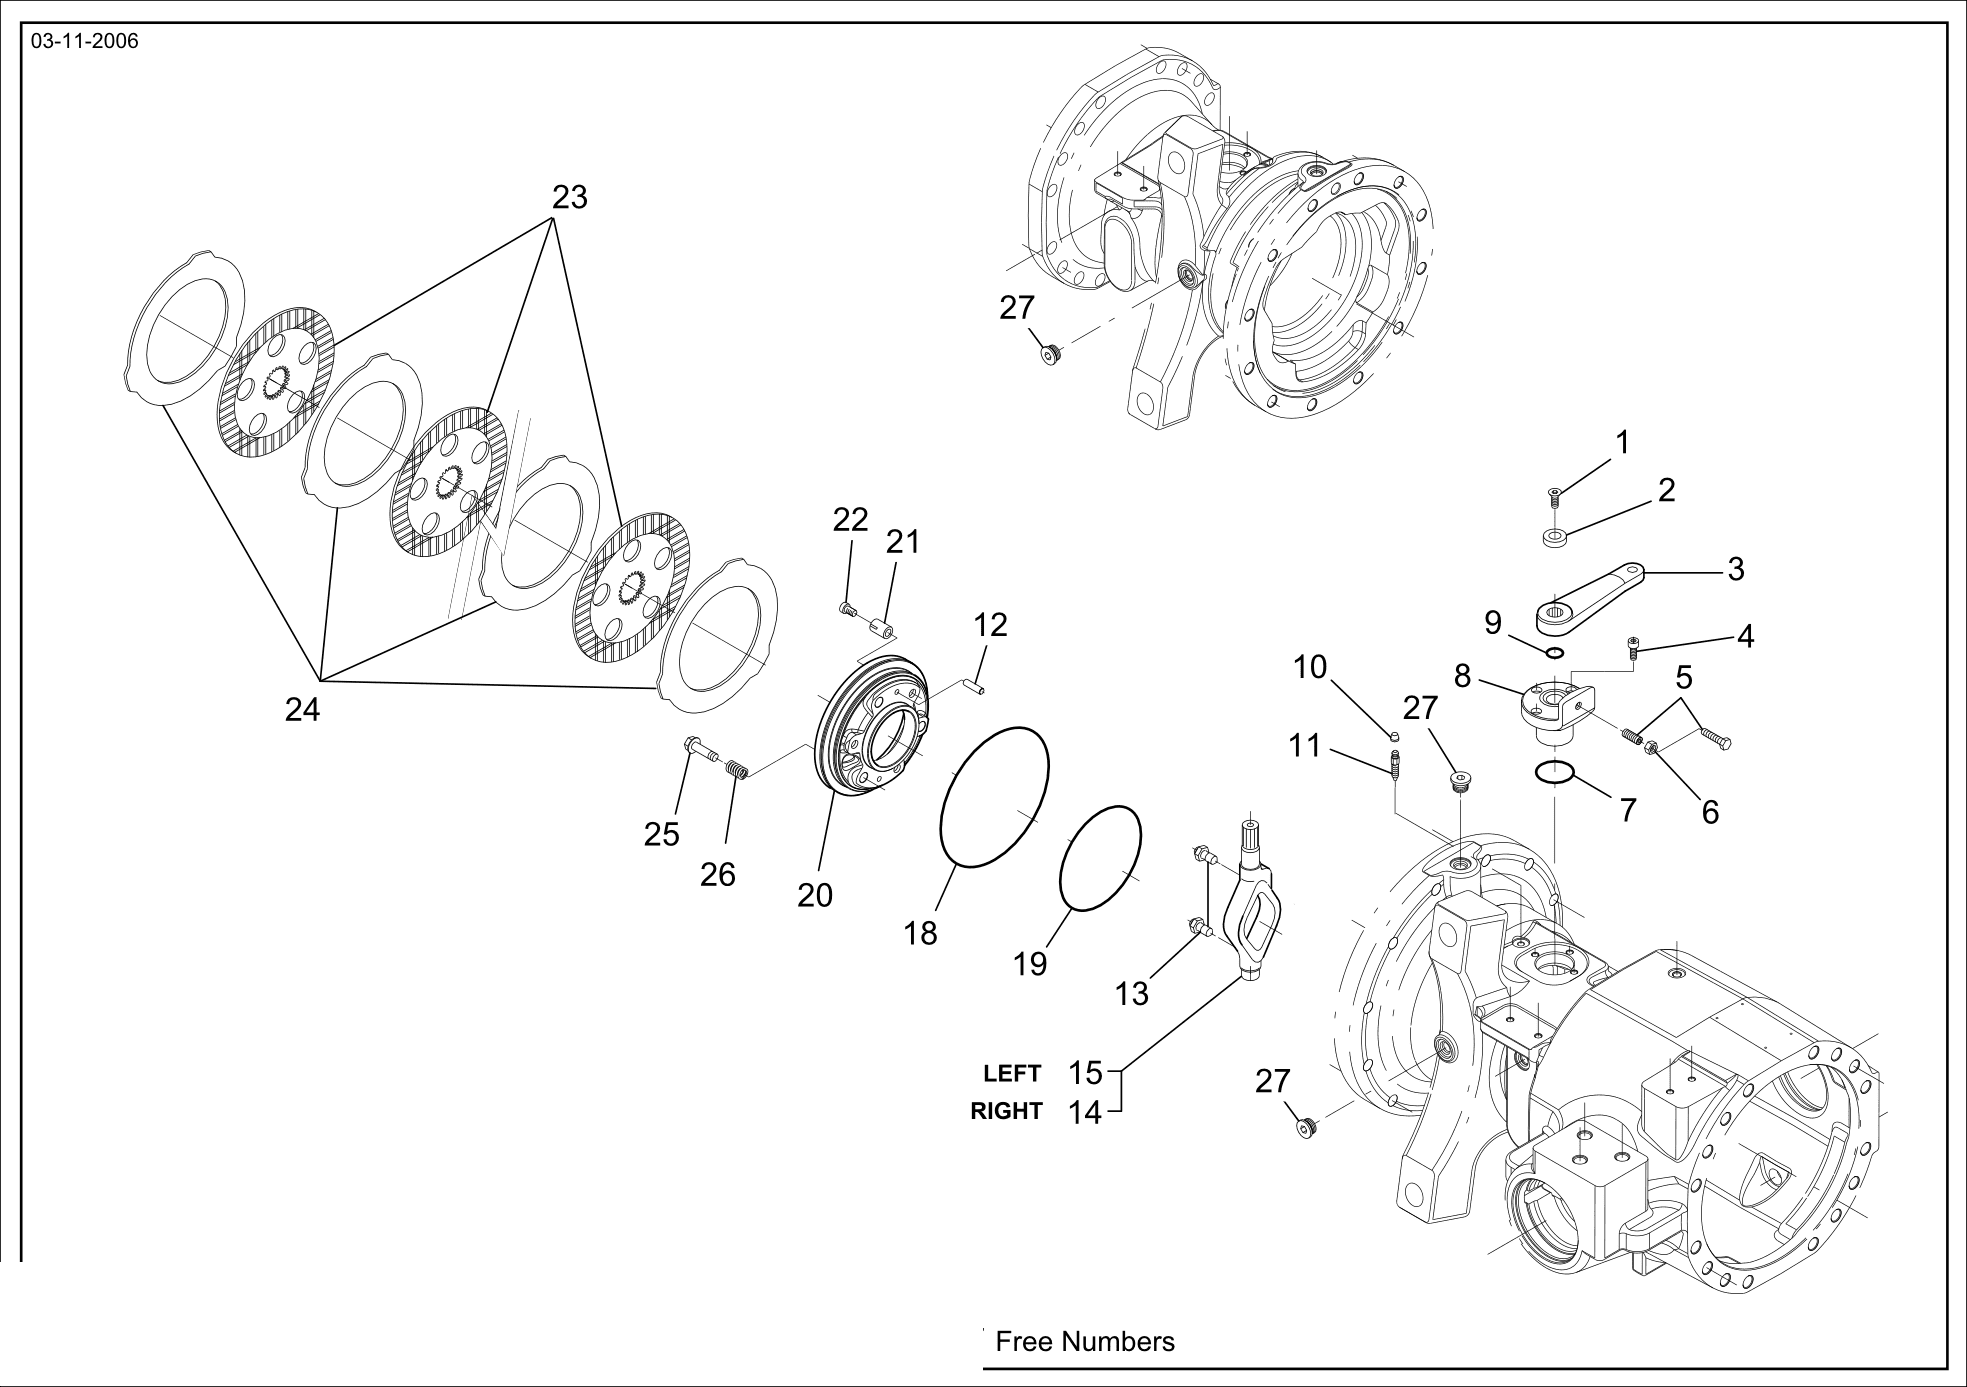 drawing for GHH 1202-0072 - BOLT (figure 5)